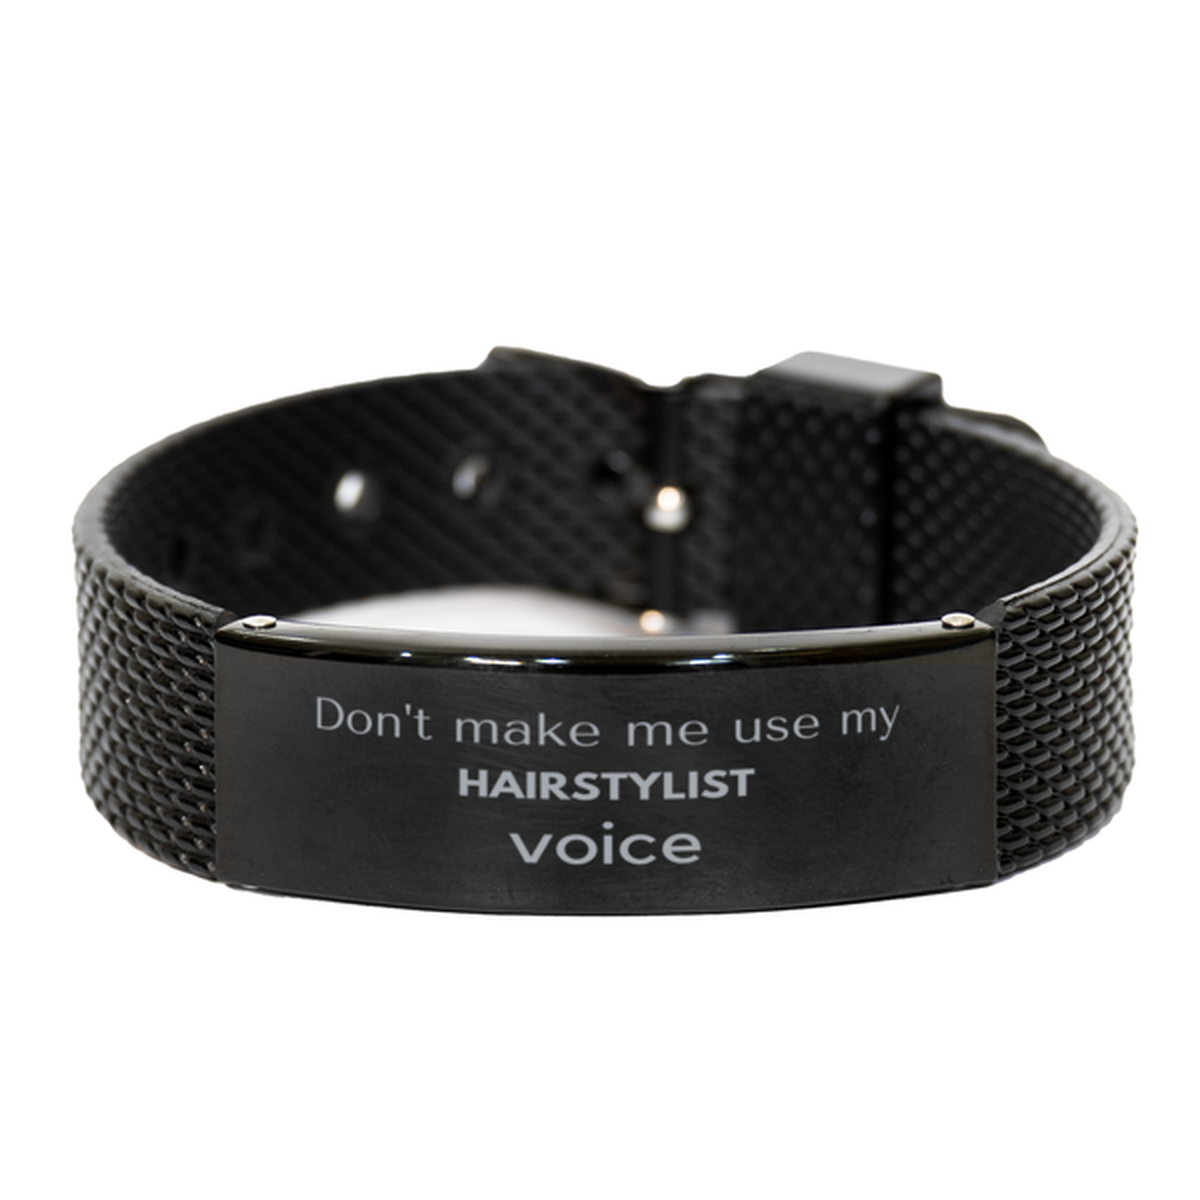 Don't make me use my Hairstylist voice, Sarcasm Hairstylist Gifts, Christmas Hairstylist Black Shark Mesh Bracelet Birthday Unique Gifts For Hairstylist Coworkers, Men, Women, Colleague, Friends